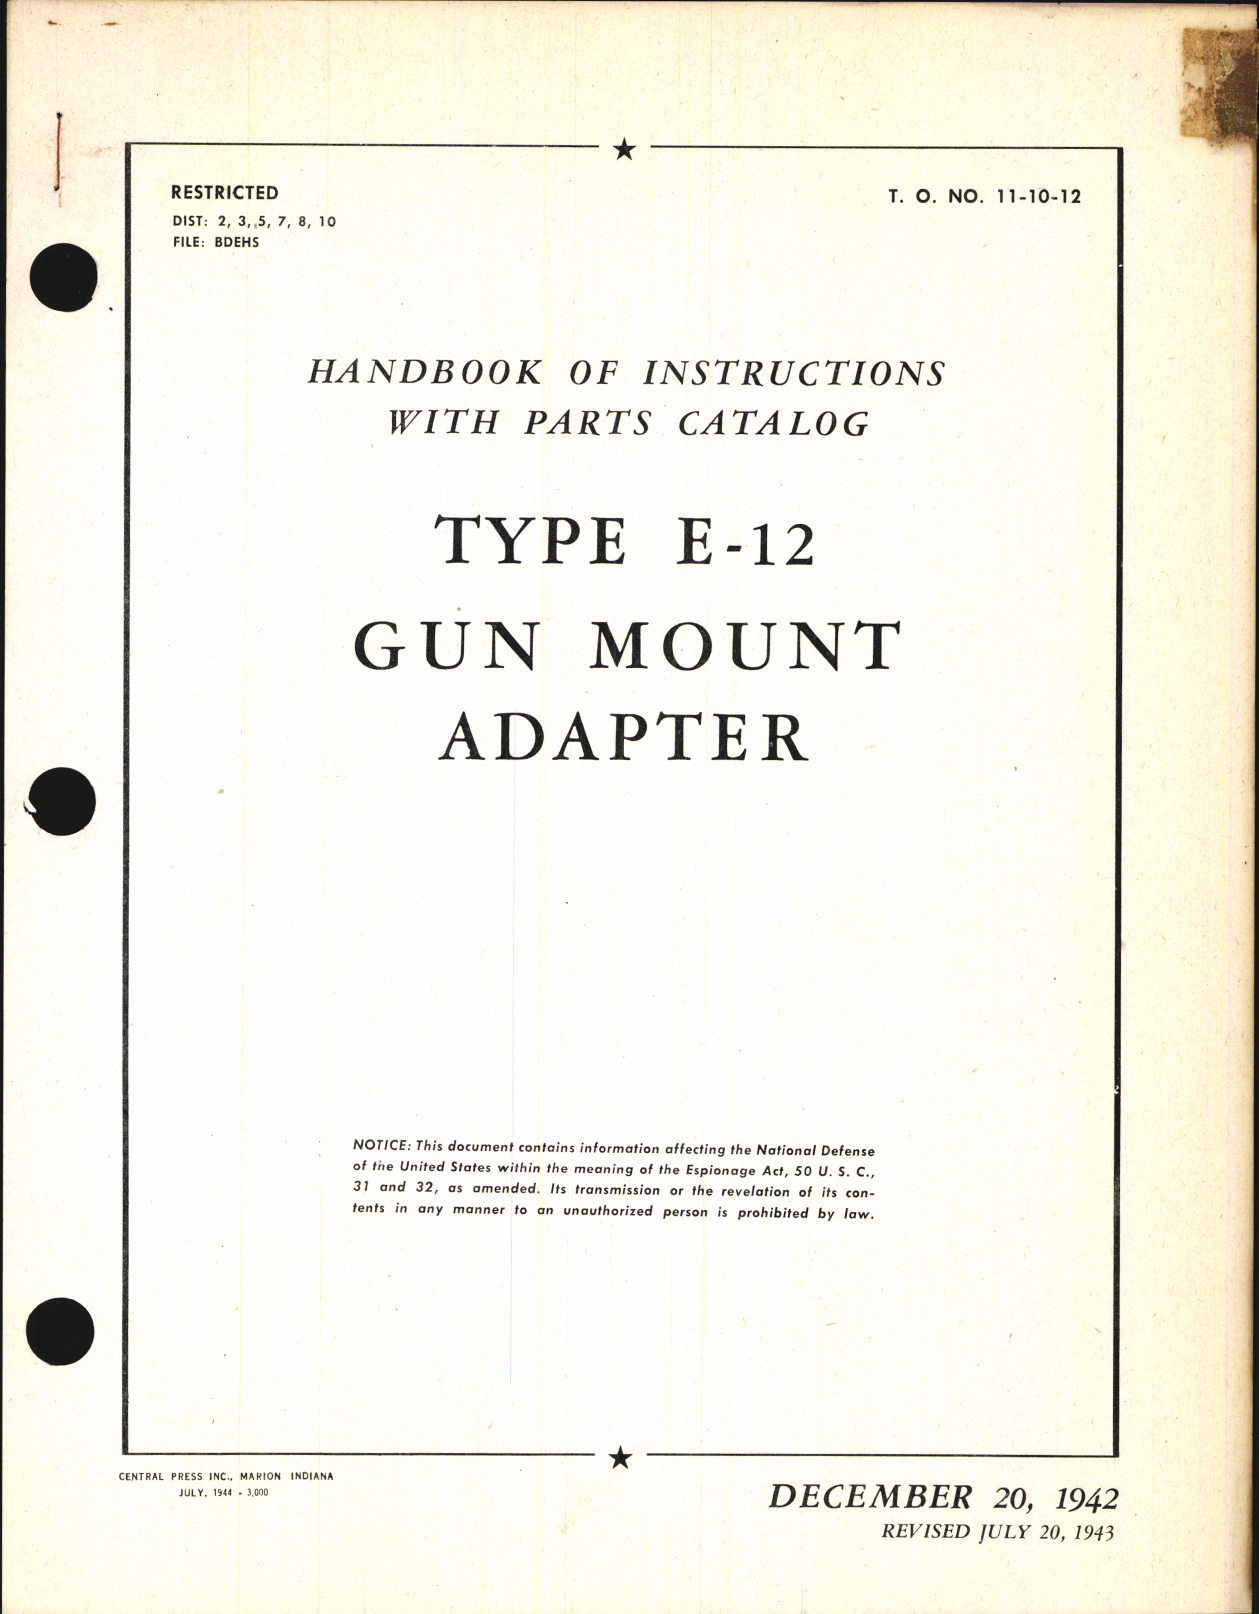 Sample page 1 from AirCorps Library document: Handbook of Instructions with Parts Catalog for Type E-12 Gun Mount Adapter